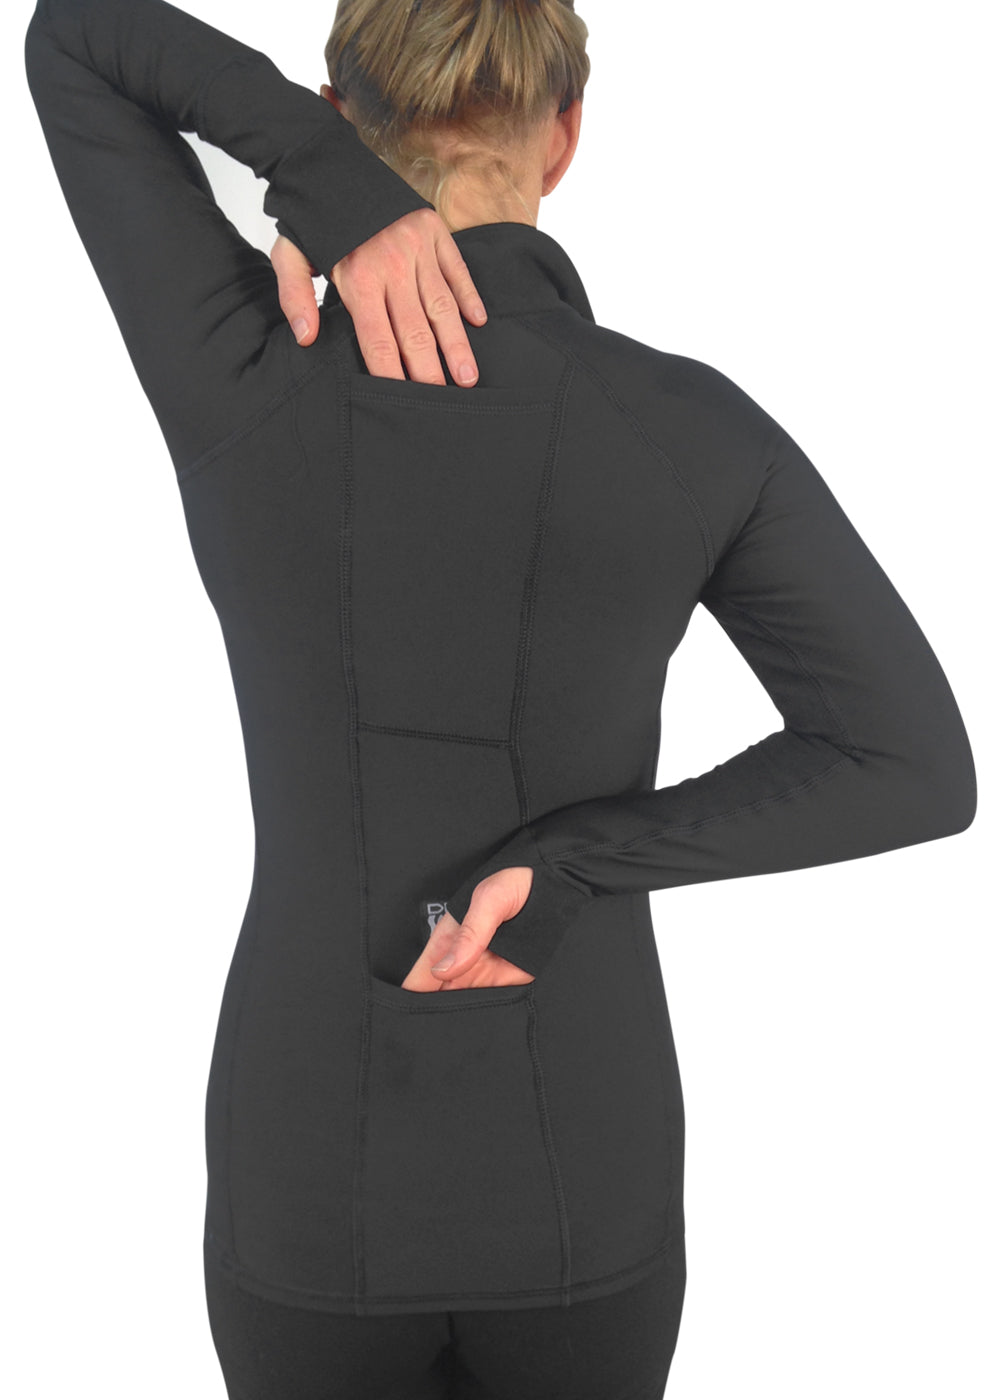 Buy Pour Moi Black Second Skin Thermal Long Sleeve Top from Next Austria